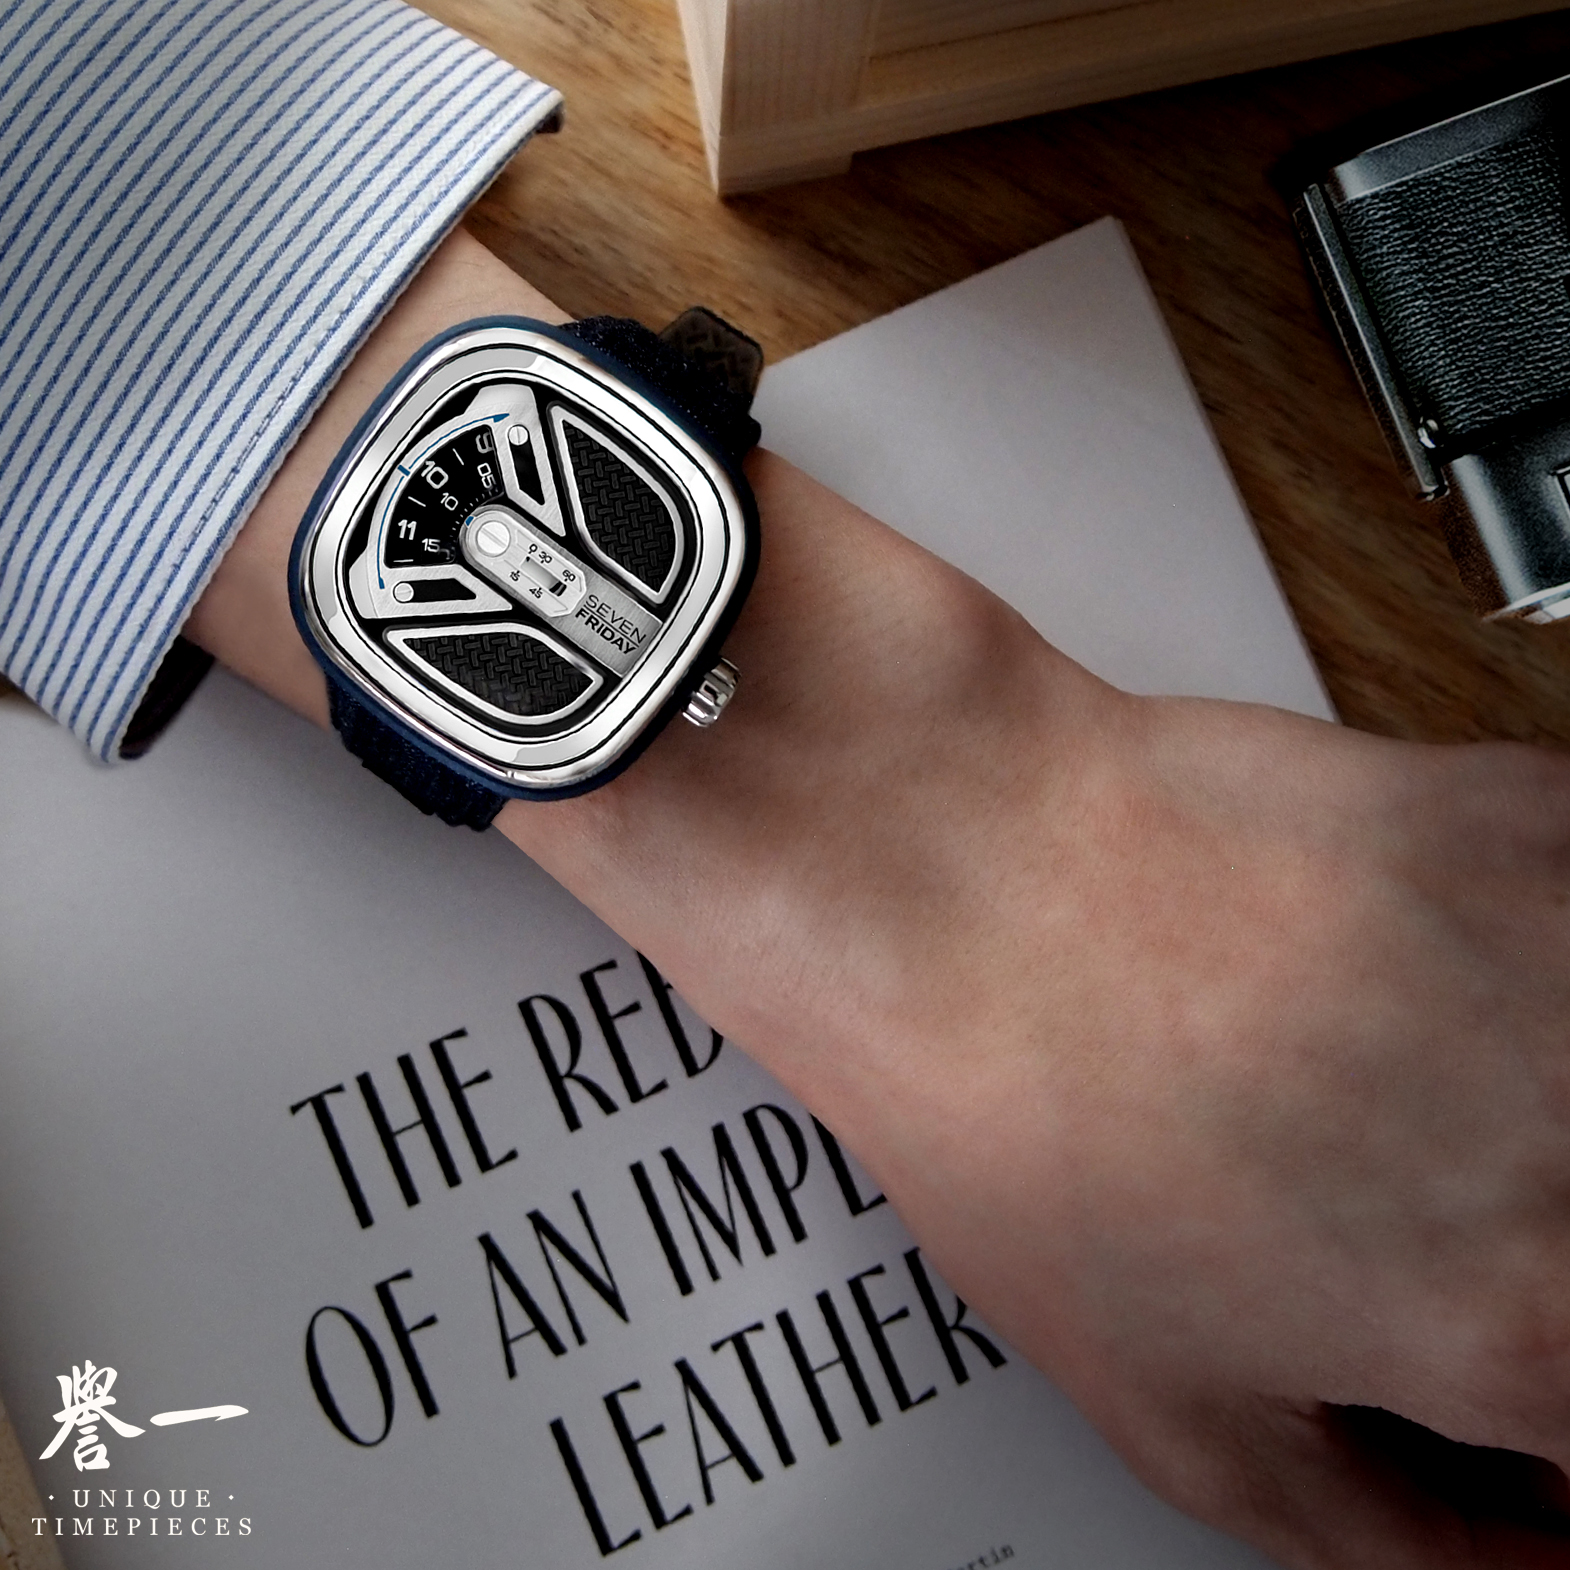 Sevenfriday - Industrial style and denim